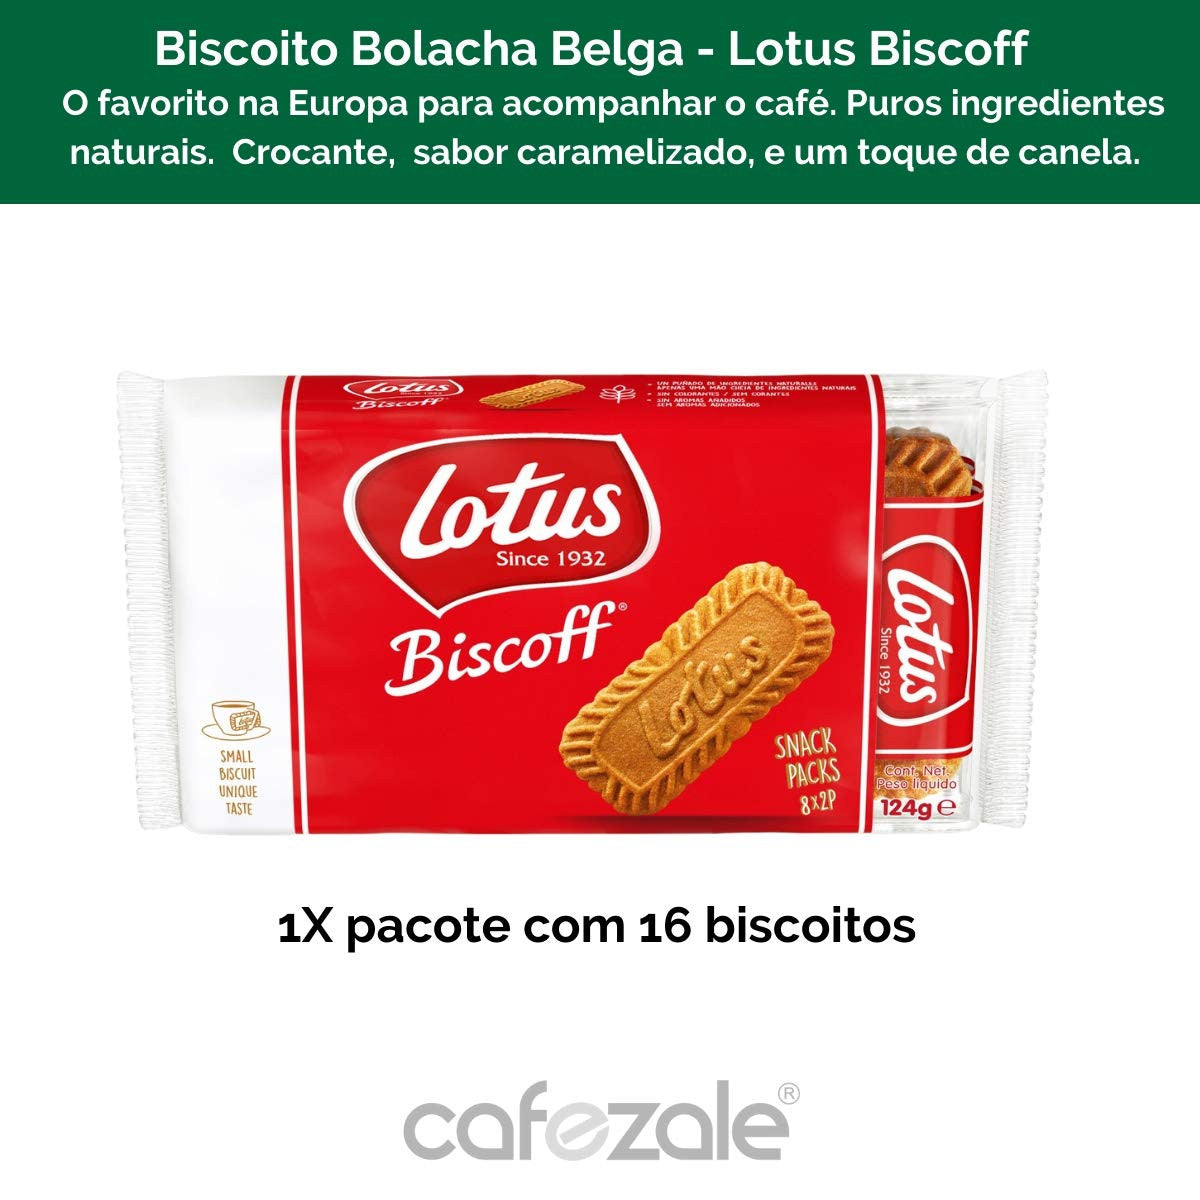 Lotus Biscoff Pocket Pack - 8 Pockets X 2 Biscuits, 124g/4.4 oz., {Imported from Canada}